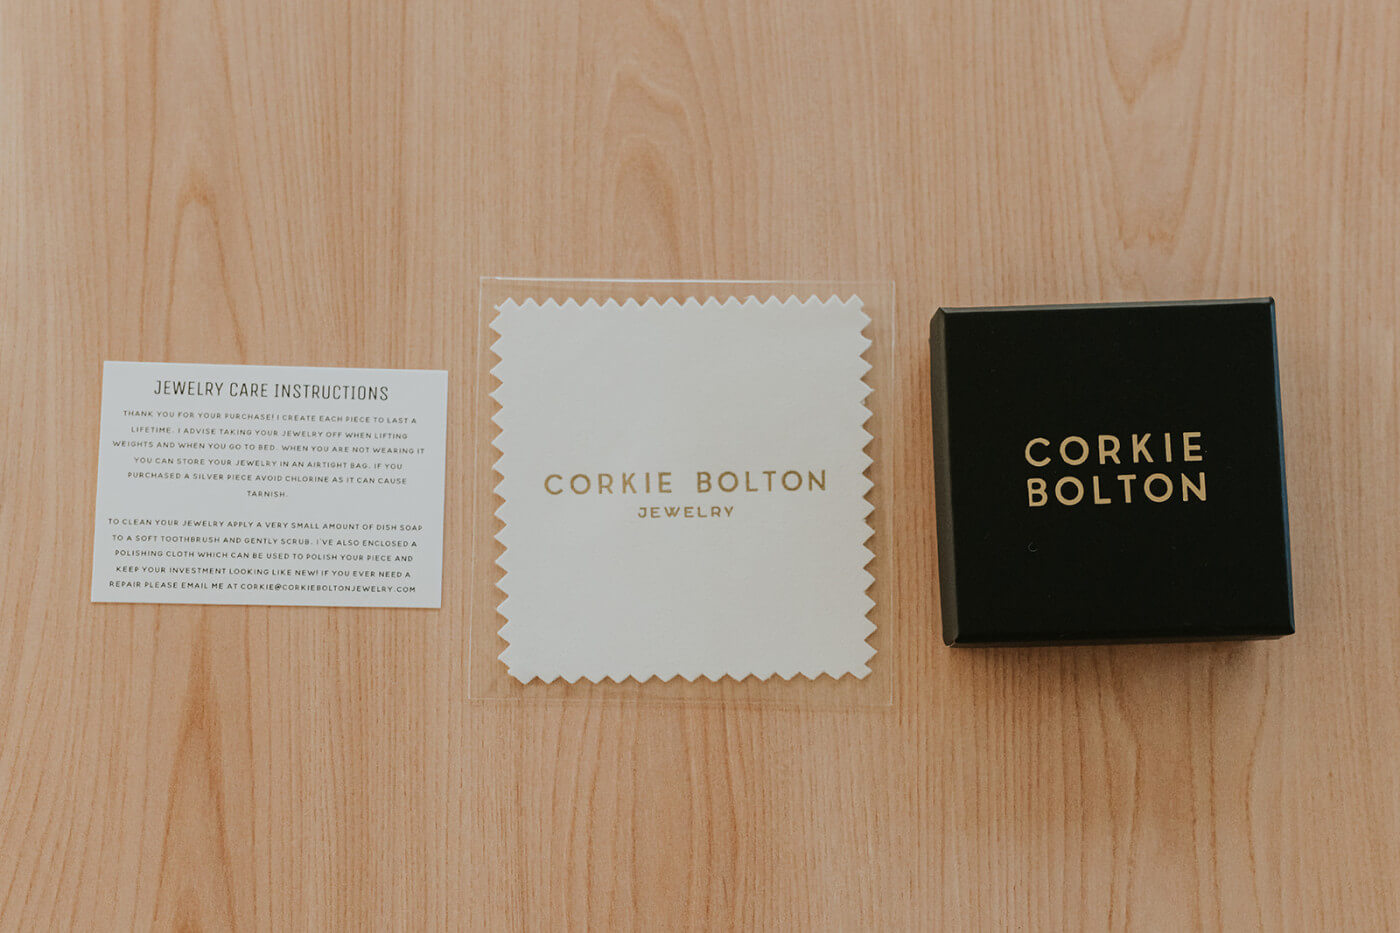 Jewelry branding and packaging